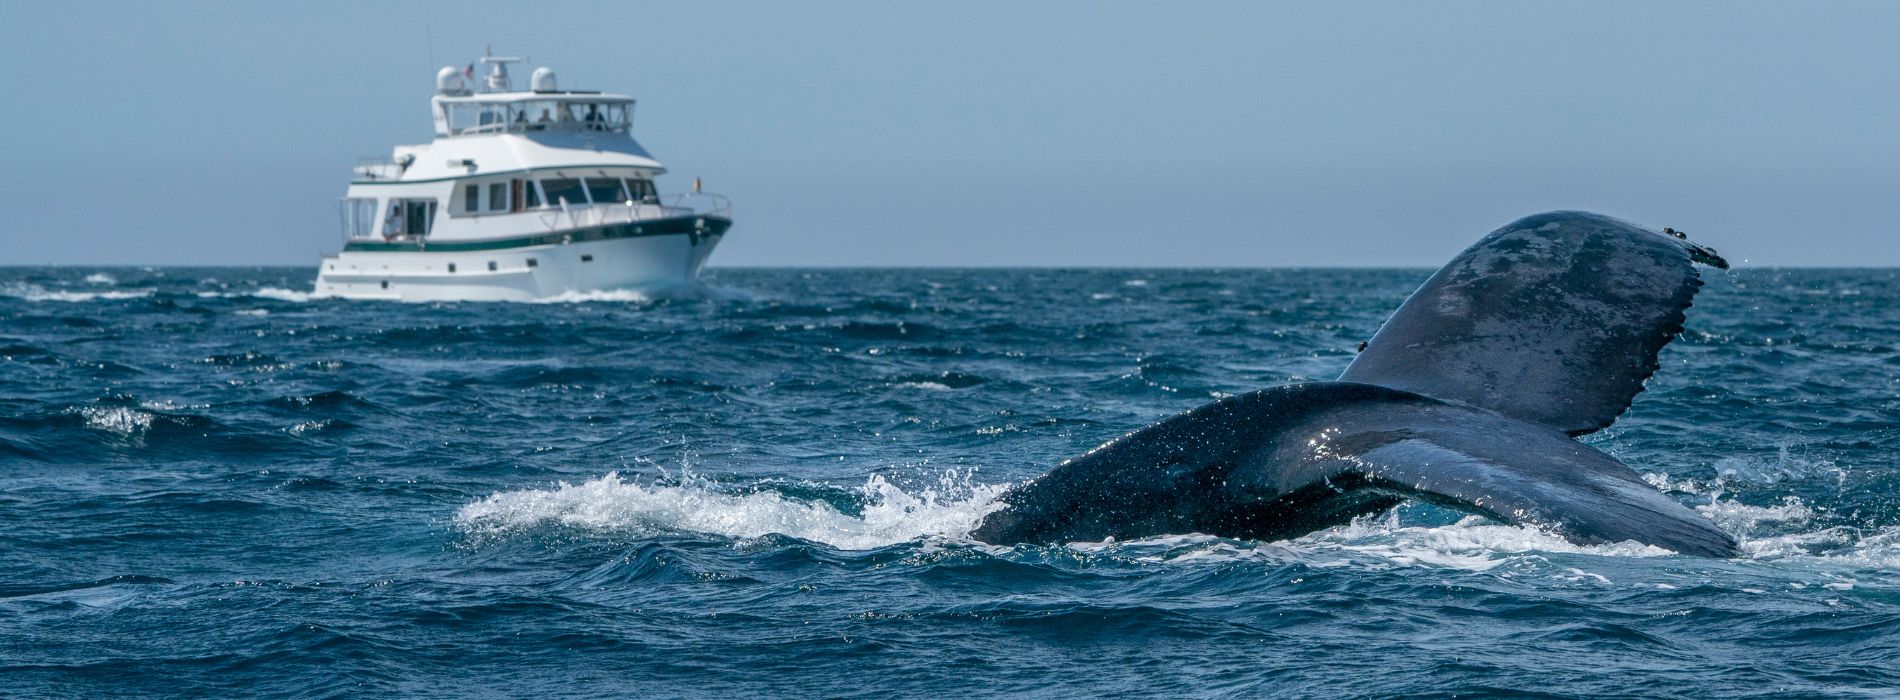 Best Whale Watching Tour in Oahu - A Spectacular Experience - Madeinsea©